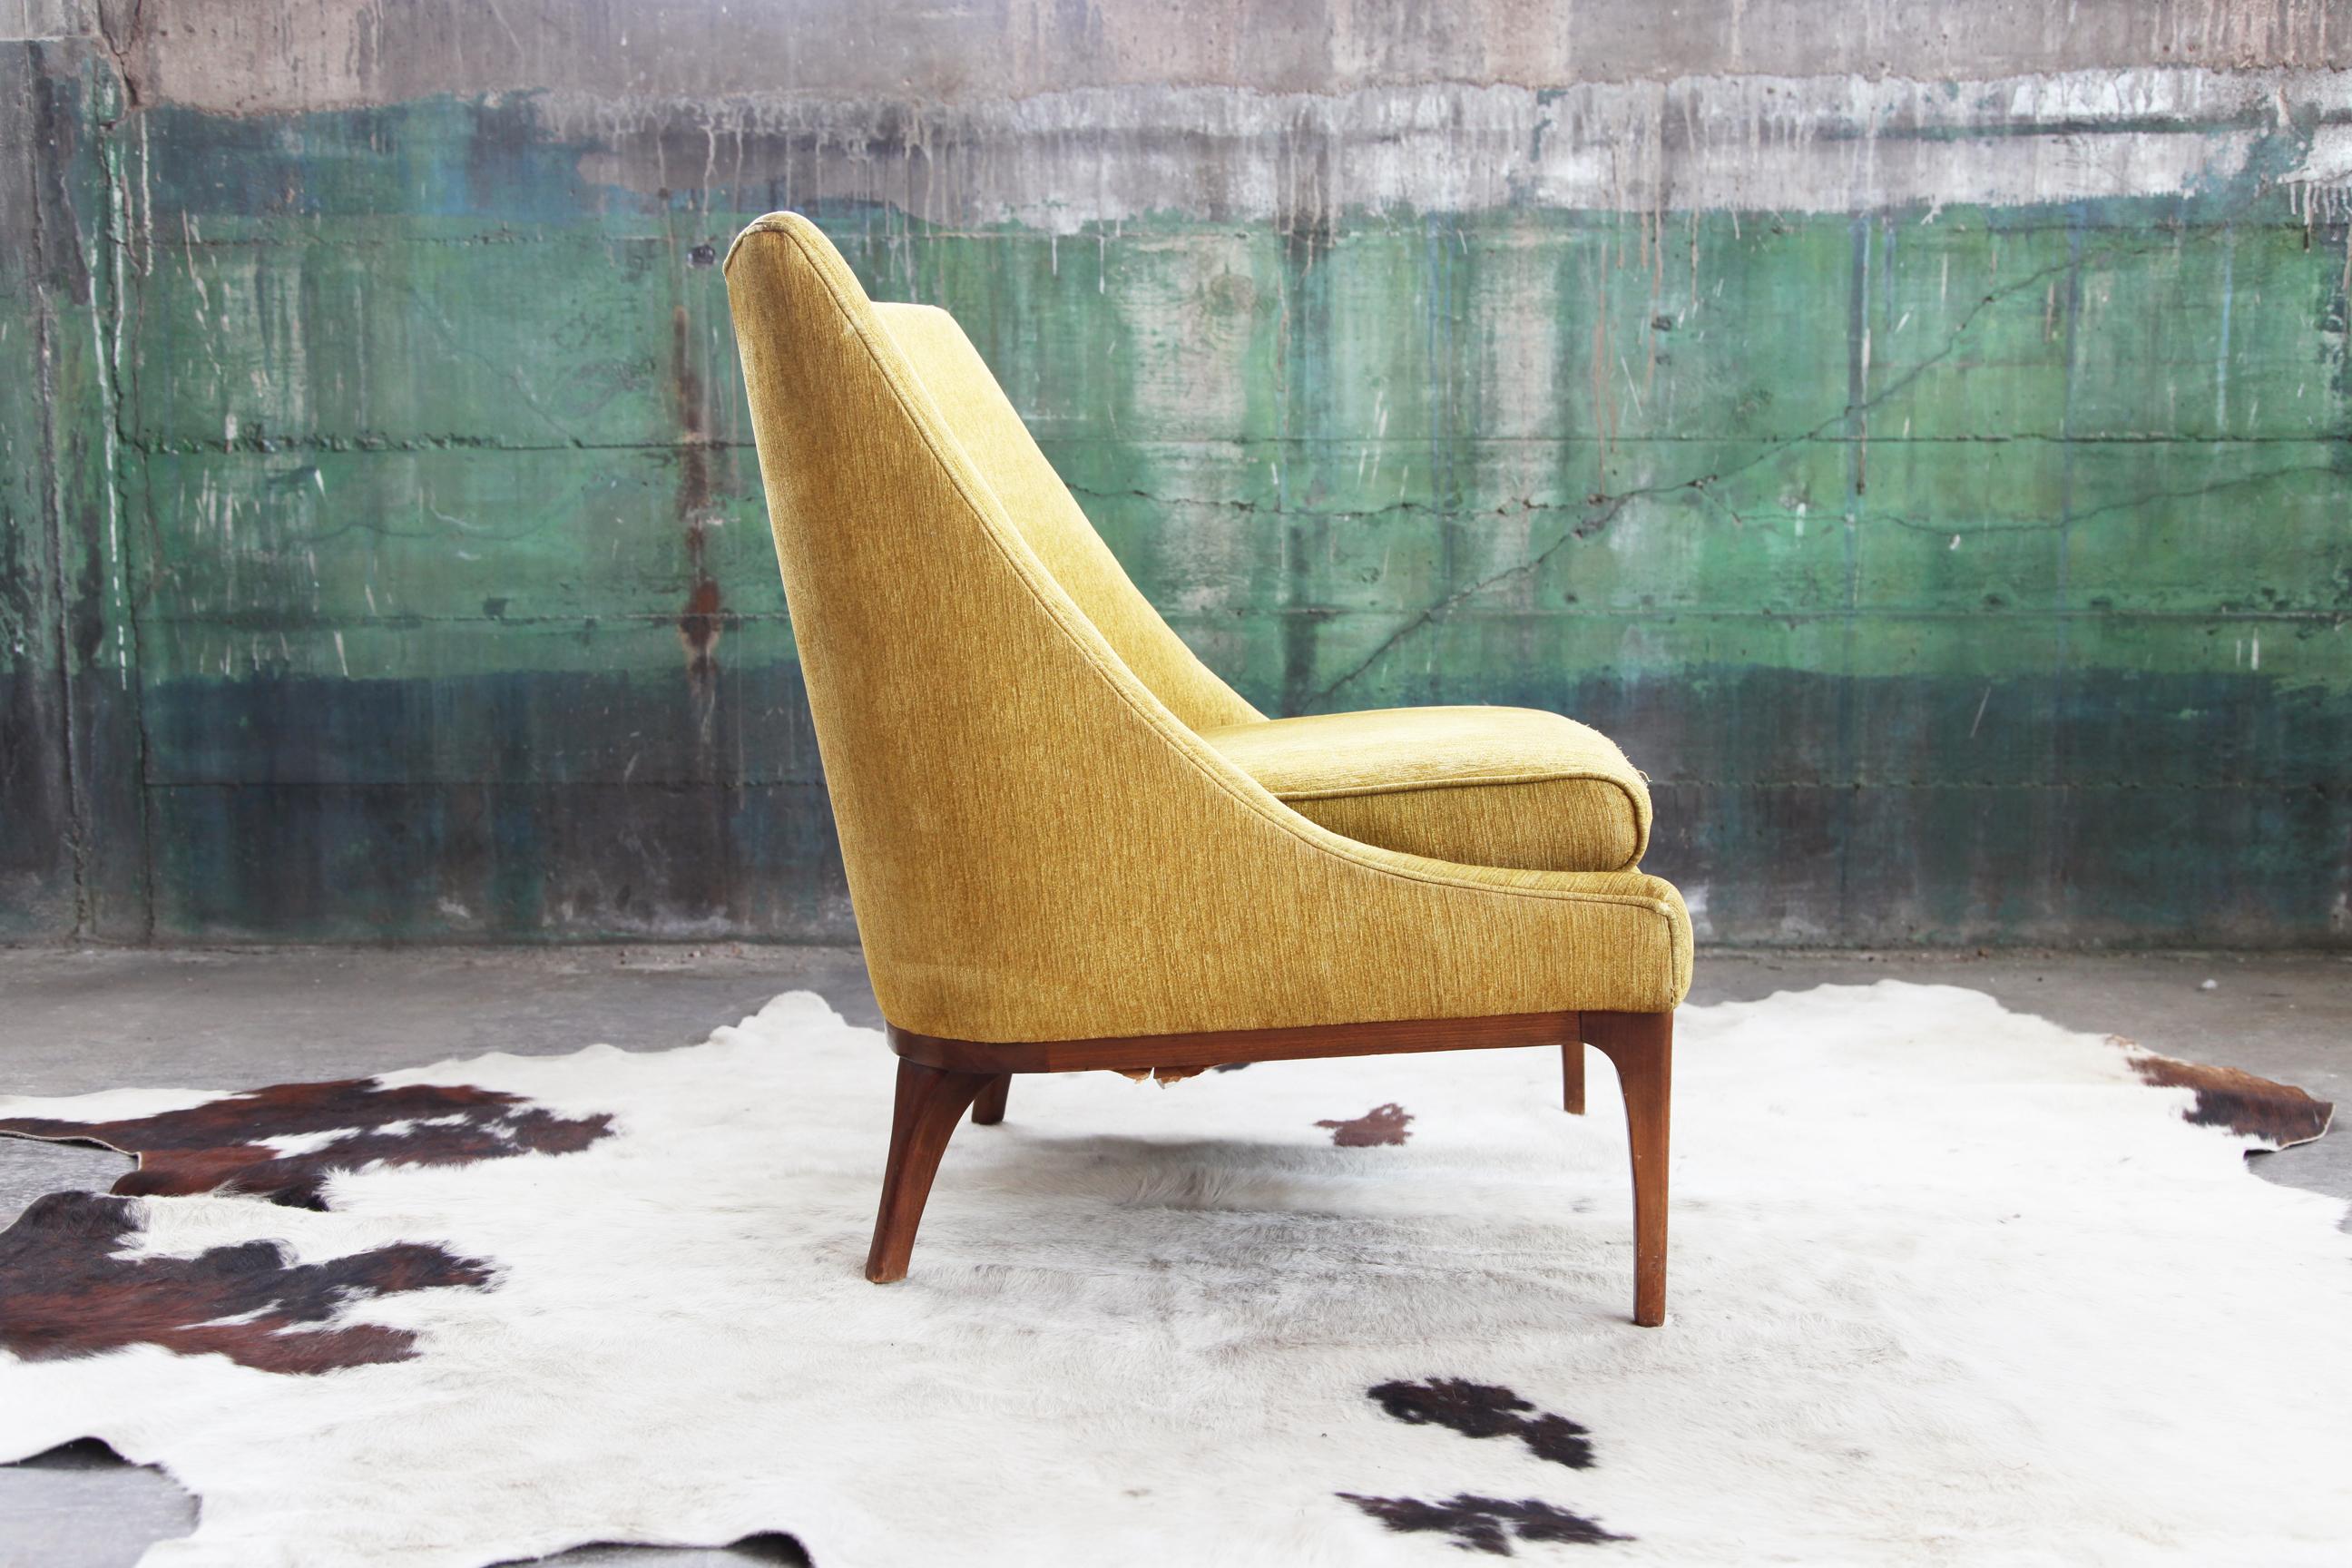 A beautiful classic mid-century designed lounge / side chair made in the US with a beautiful Scandinavian silhouette. The chair is upholstered in a high quality mustard yellow orange velvet with a reversible seat cushion.

This chair was part of